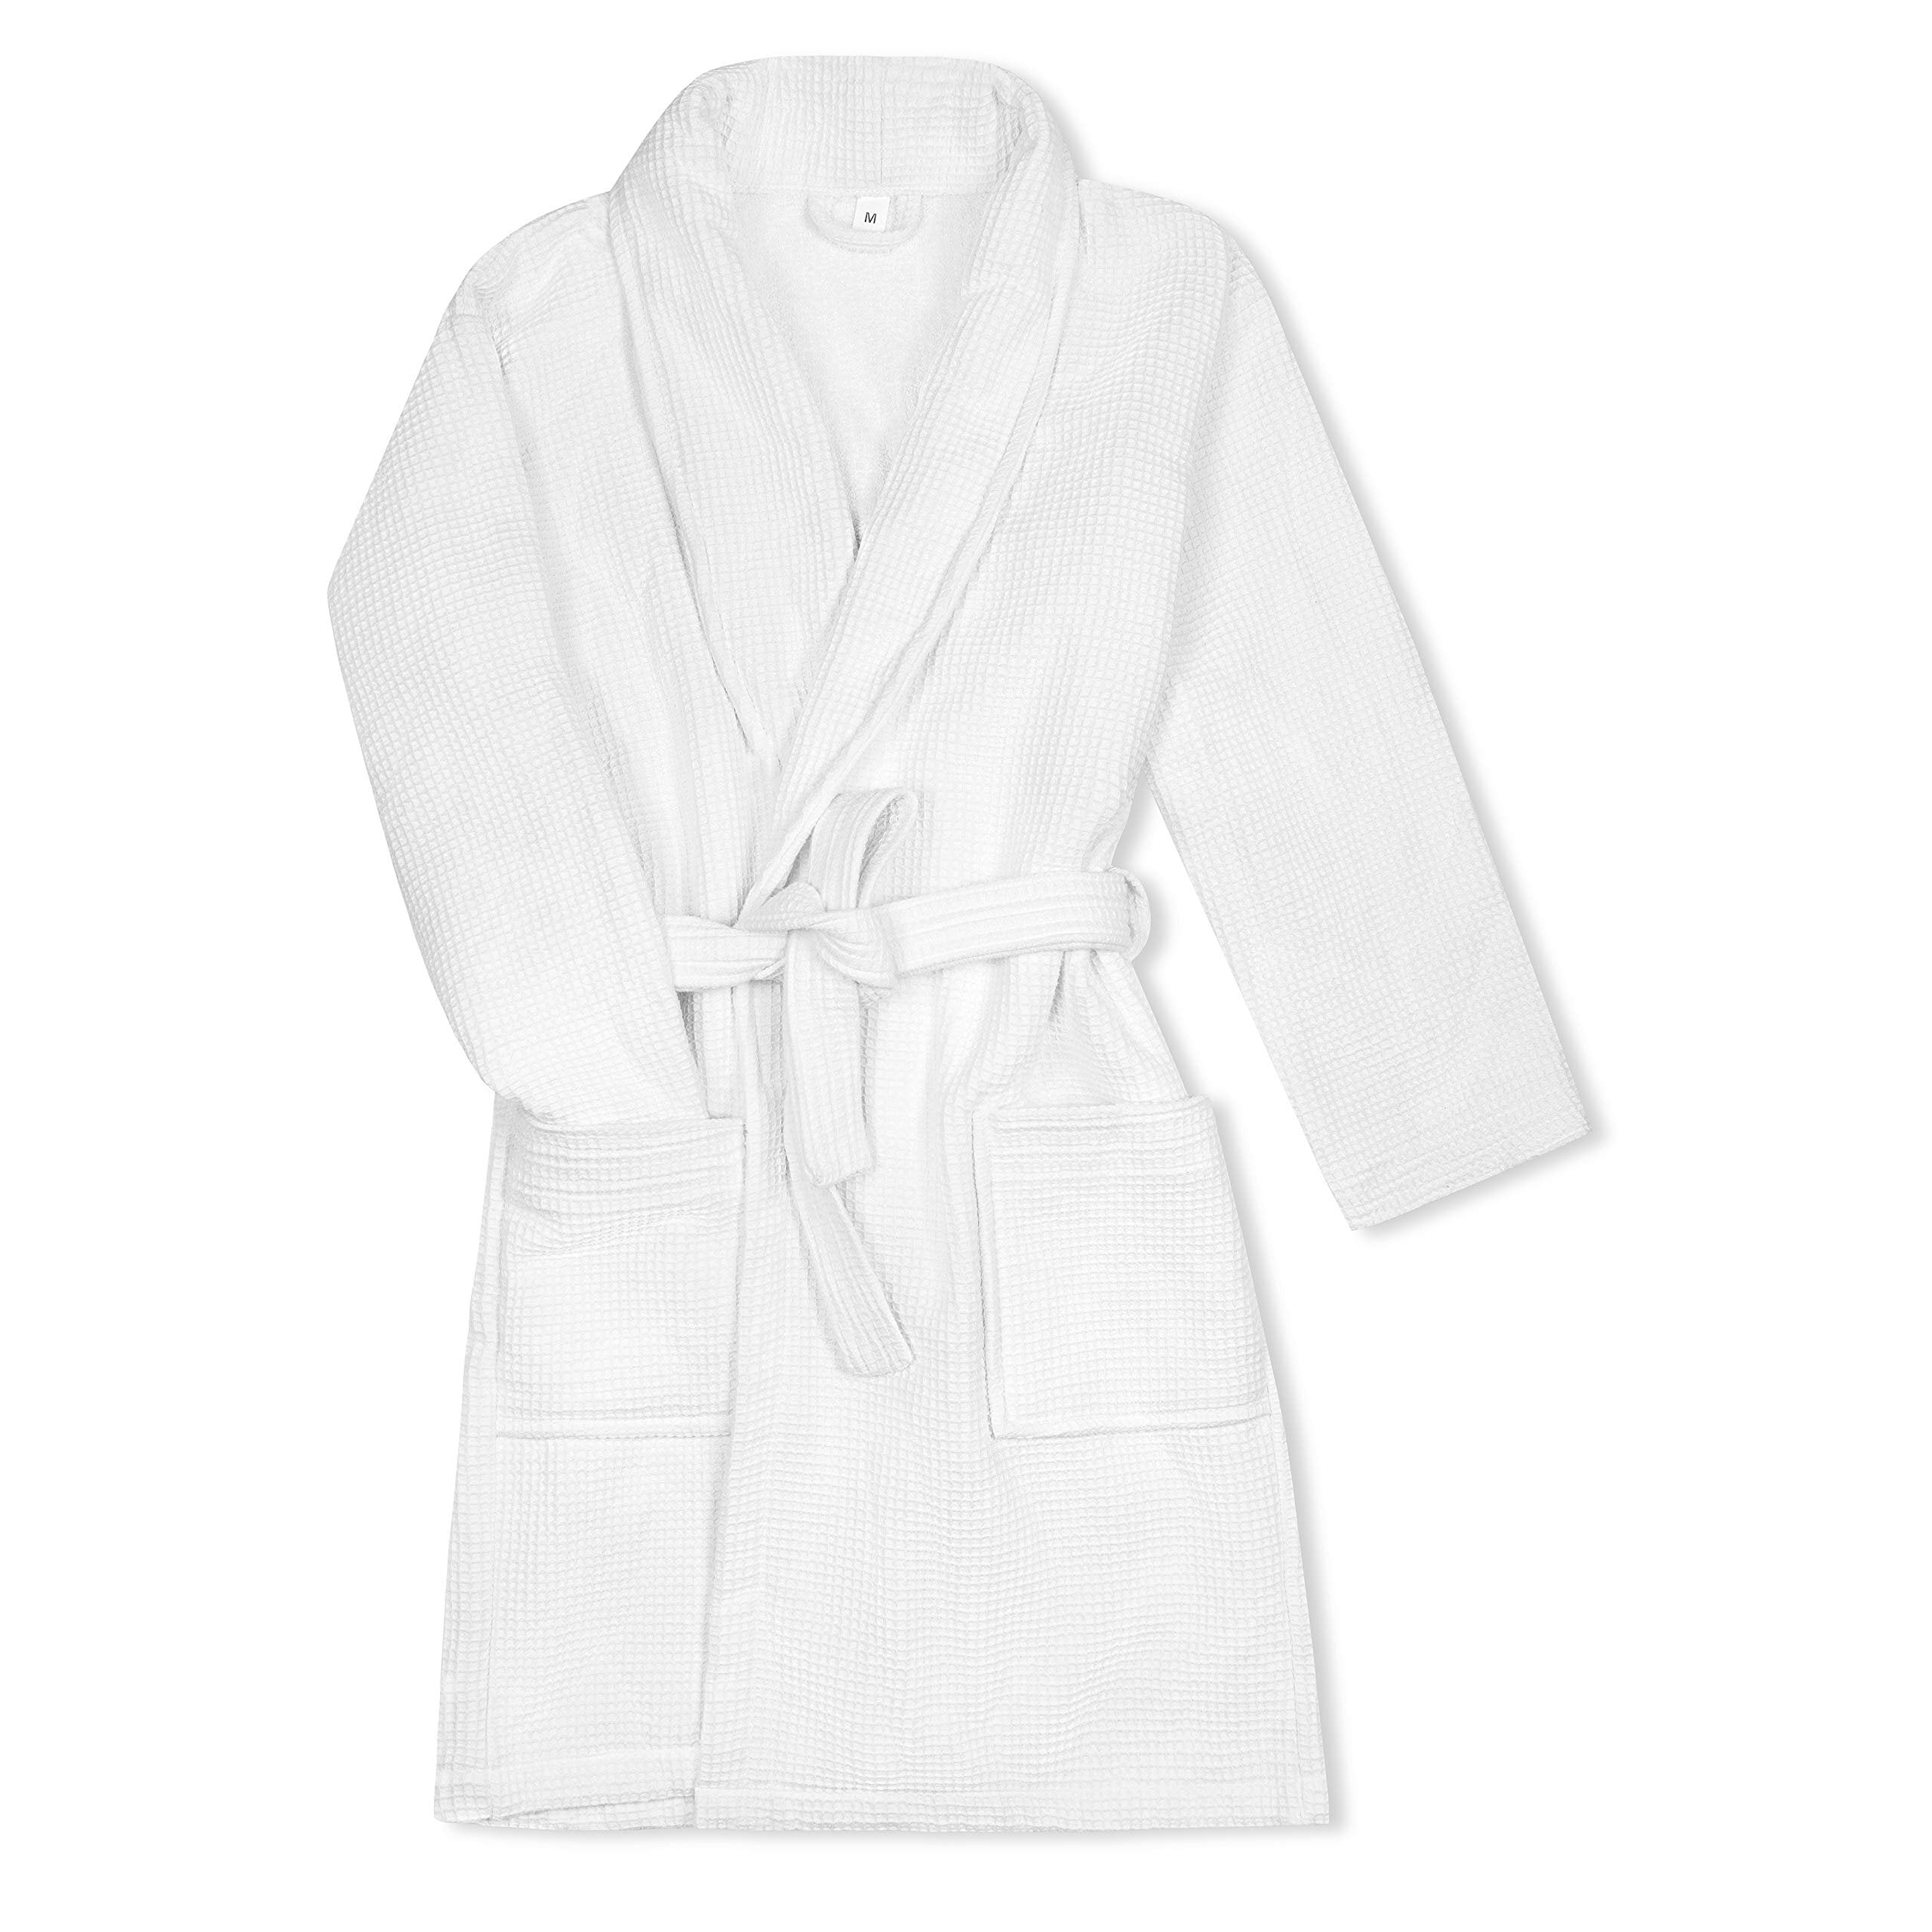 Luxury White Bath Robe Unisex, Cotton waffle bathrobe large for Spa, Shower, Hotel, House, lightweight soft terry bathrobes long size, Quick Dry terrycloth robes absorbent (L/XL)